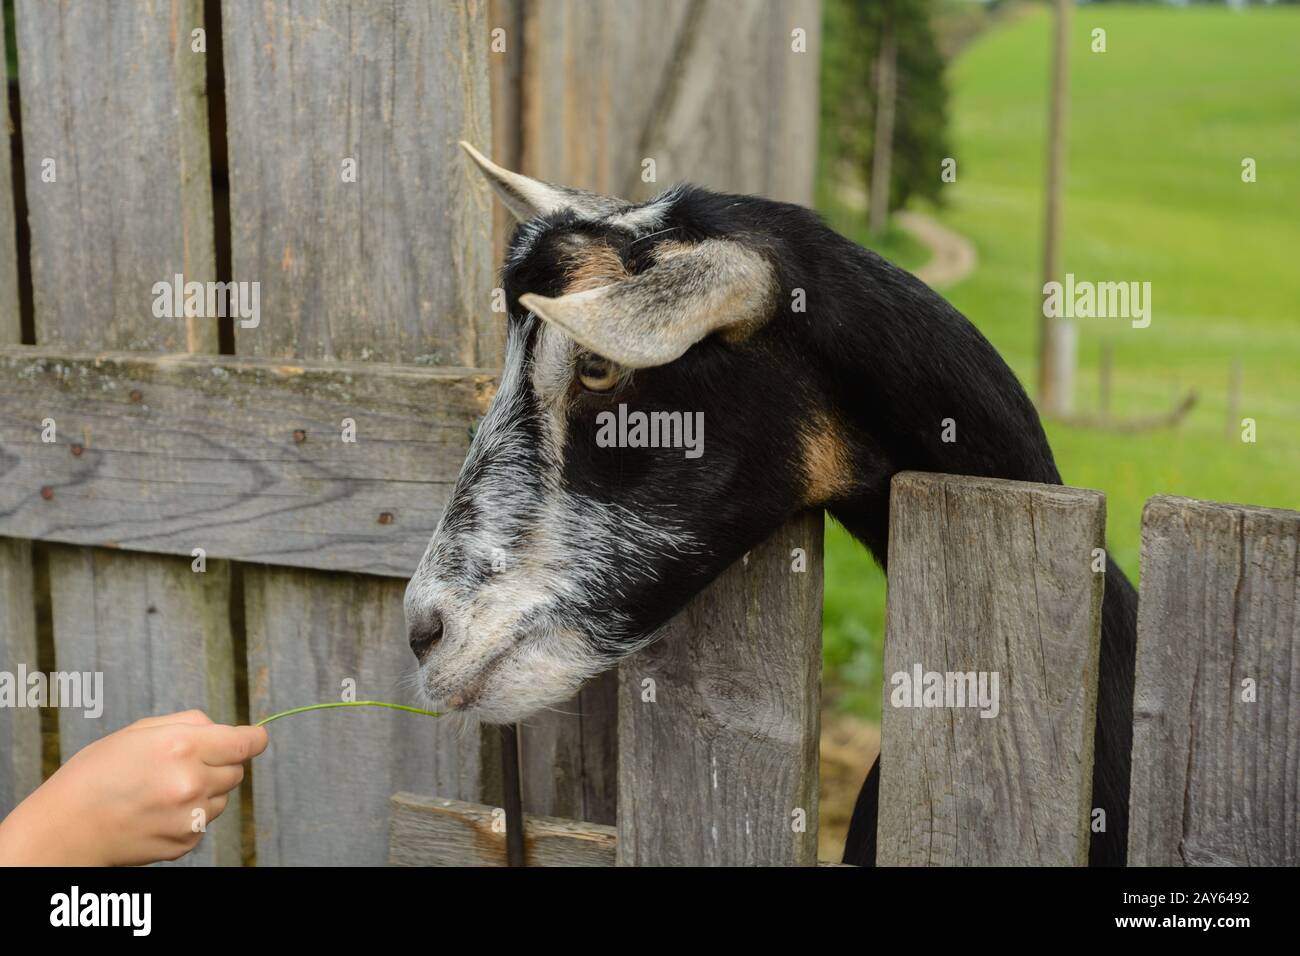 Goat holds its head over the wooden fence - species-appropriate animal husbandry Stock Photo